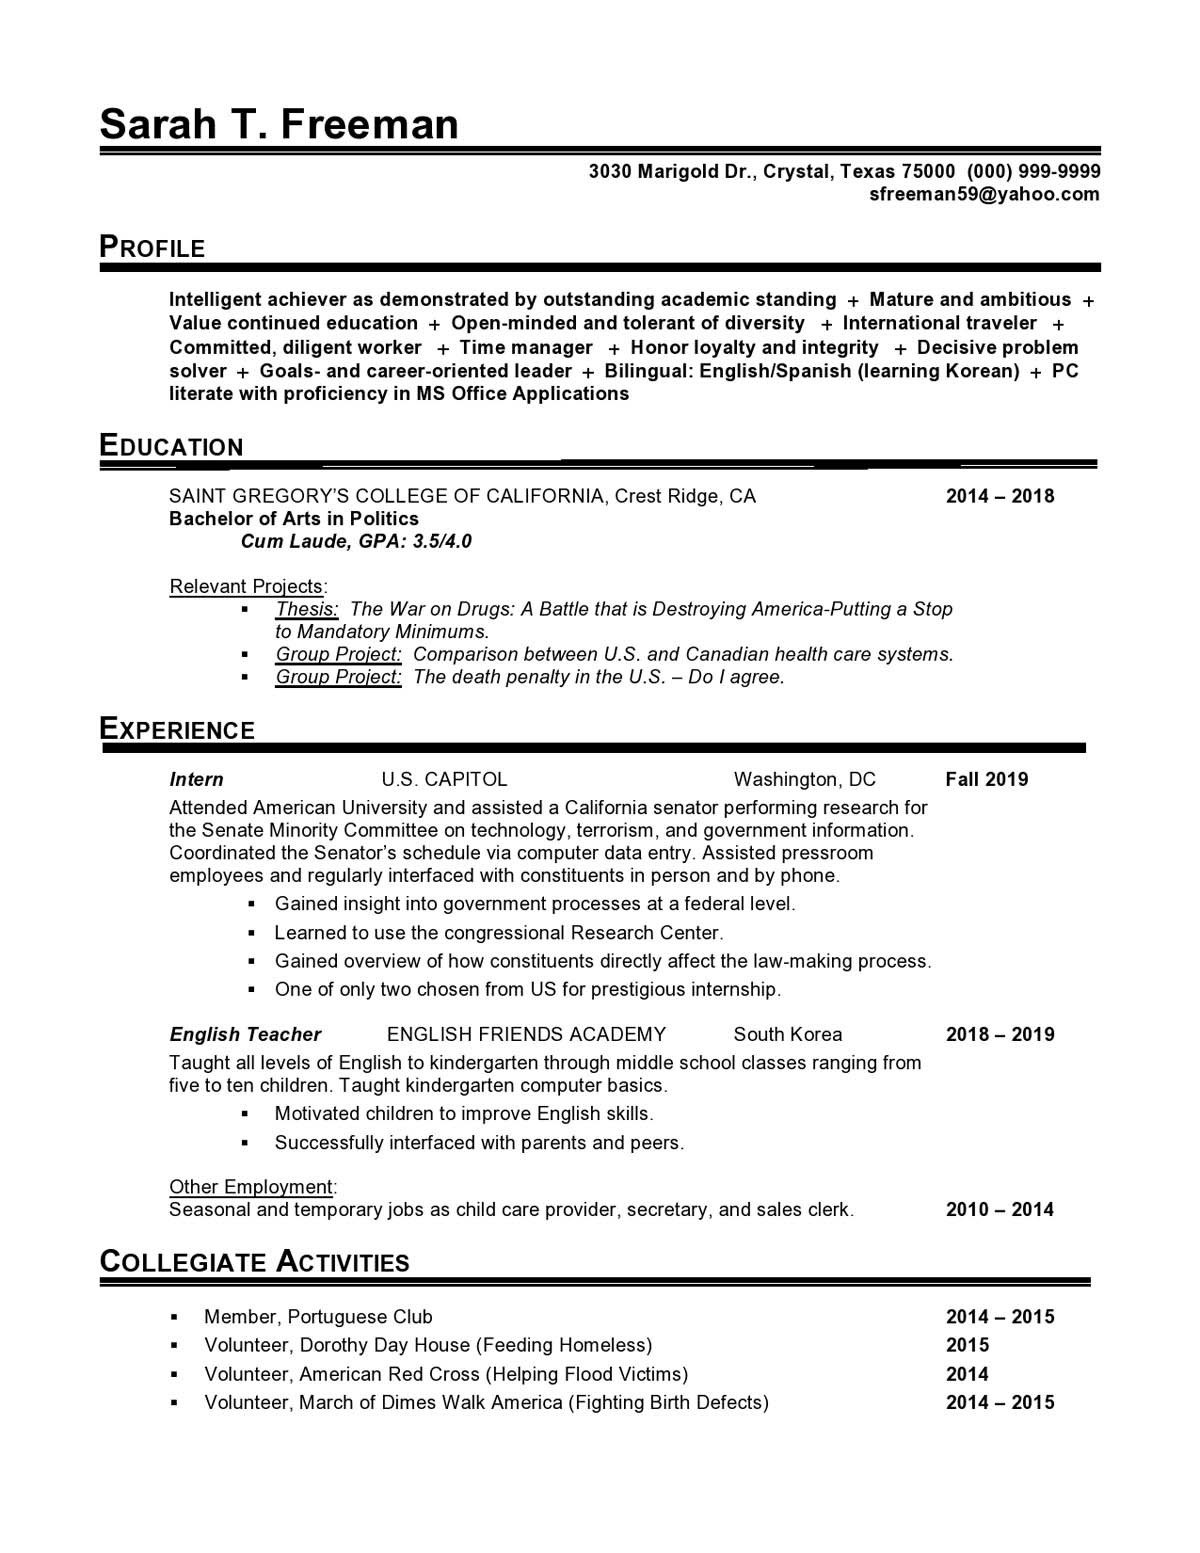 Sample Resume for Government Job In India Government Entry Level Resume Samples Templates Vault.com